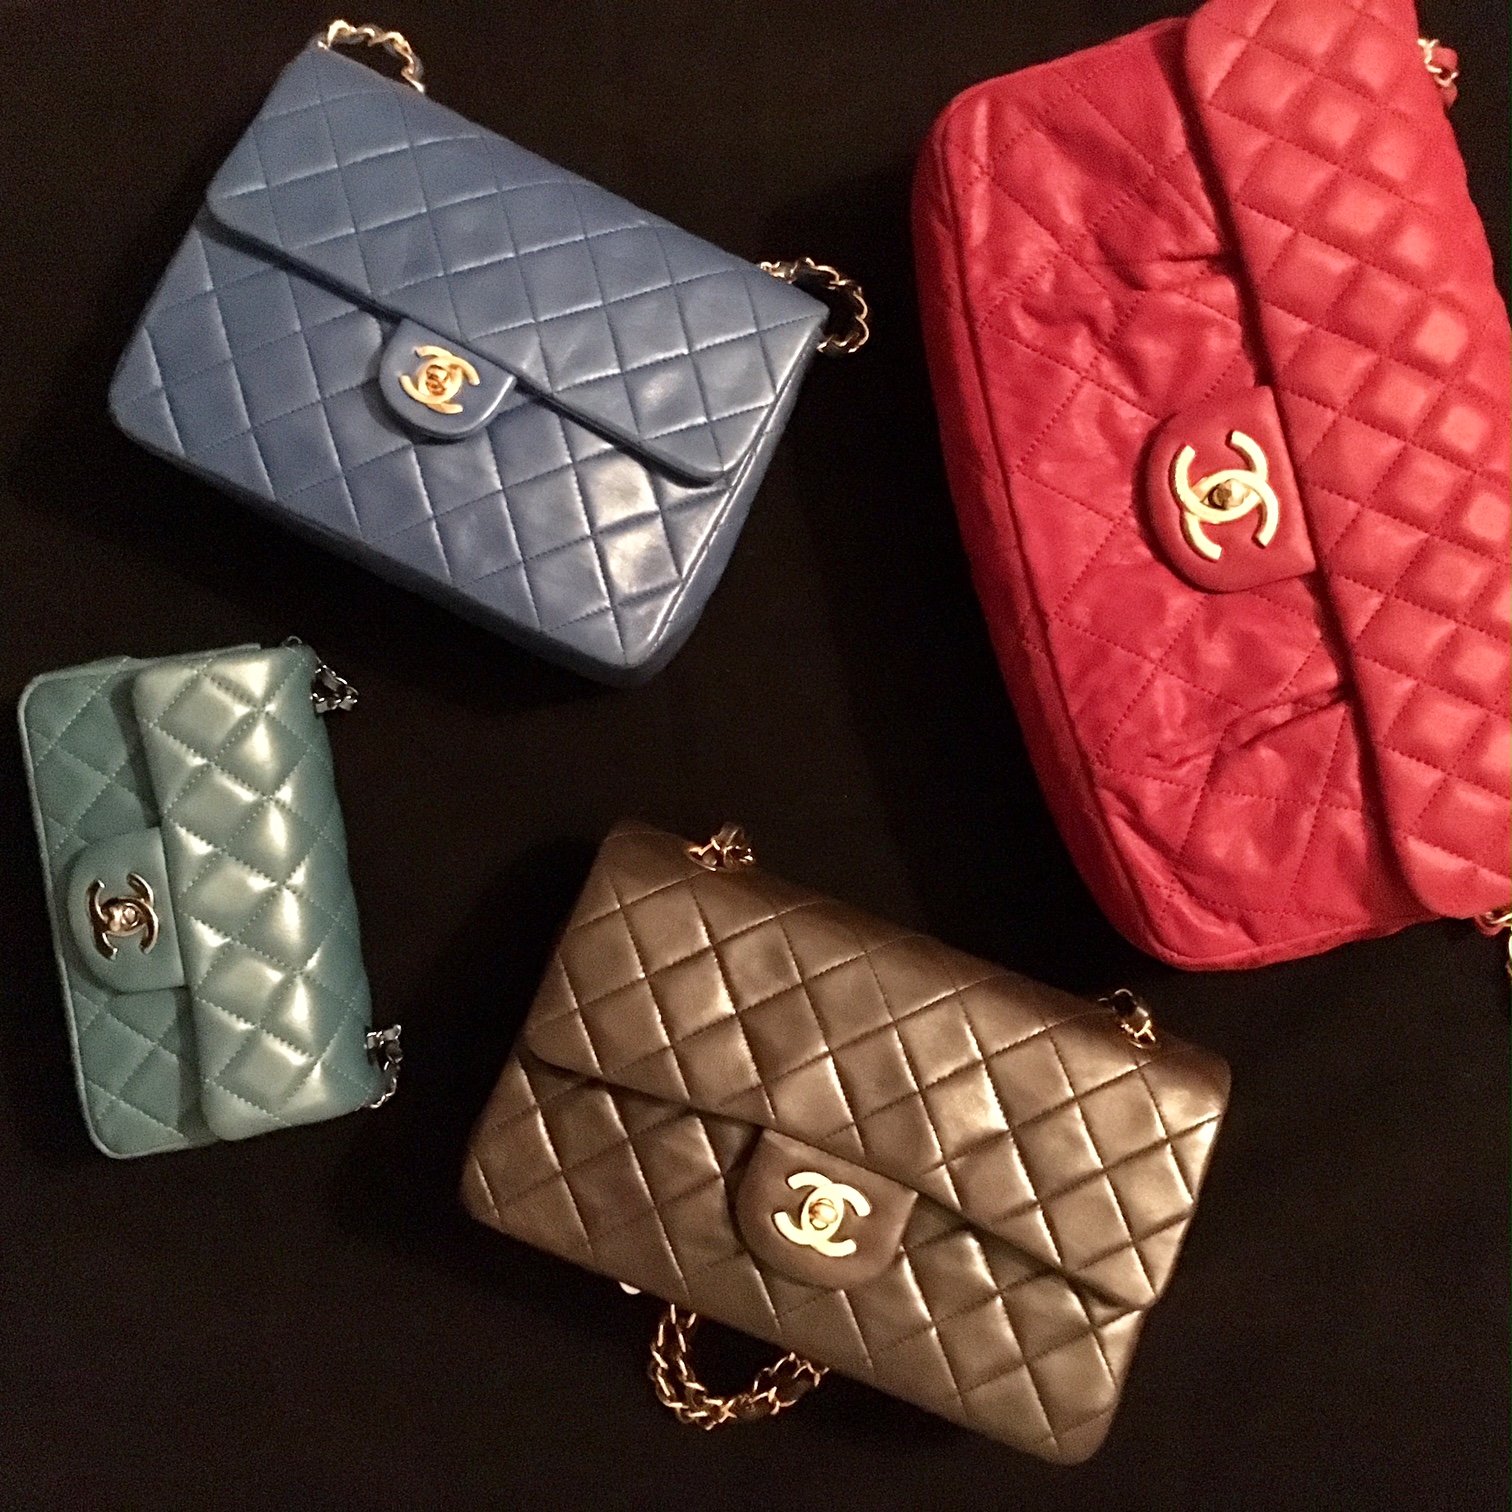 Sell Chanel Bags In Orange County - Same Day Cash Payment